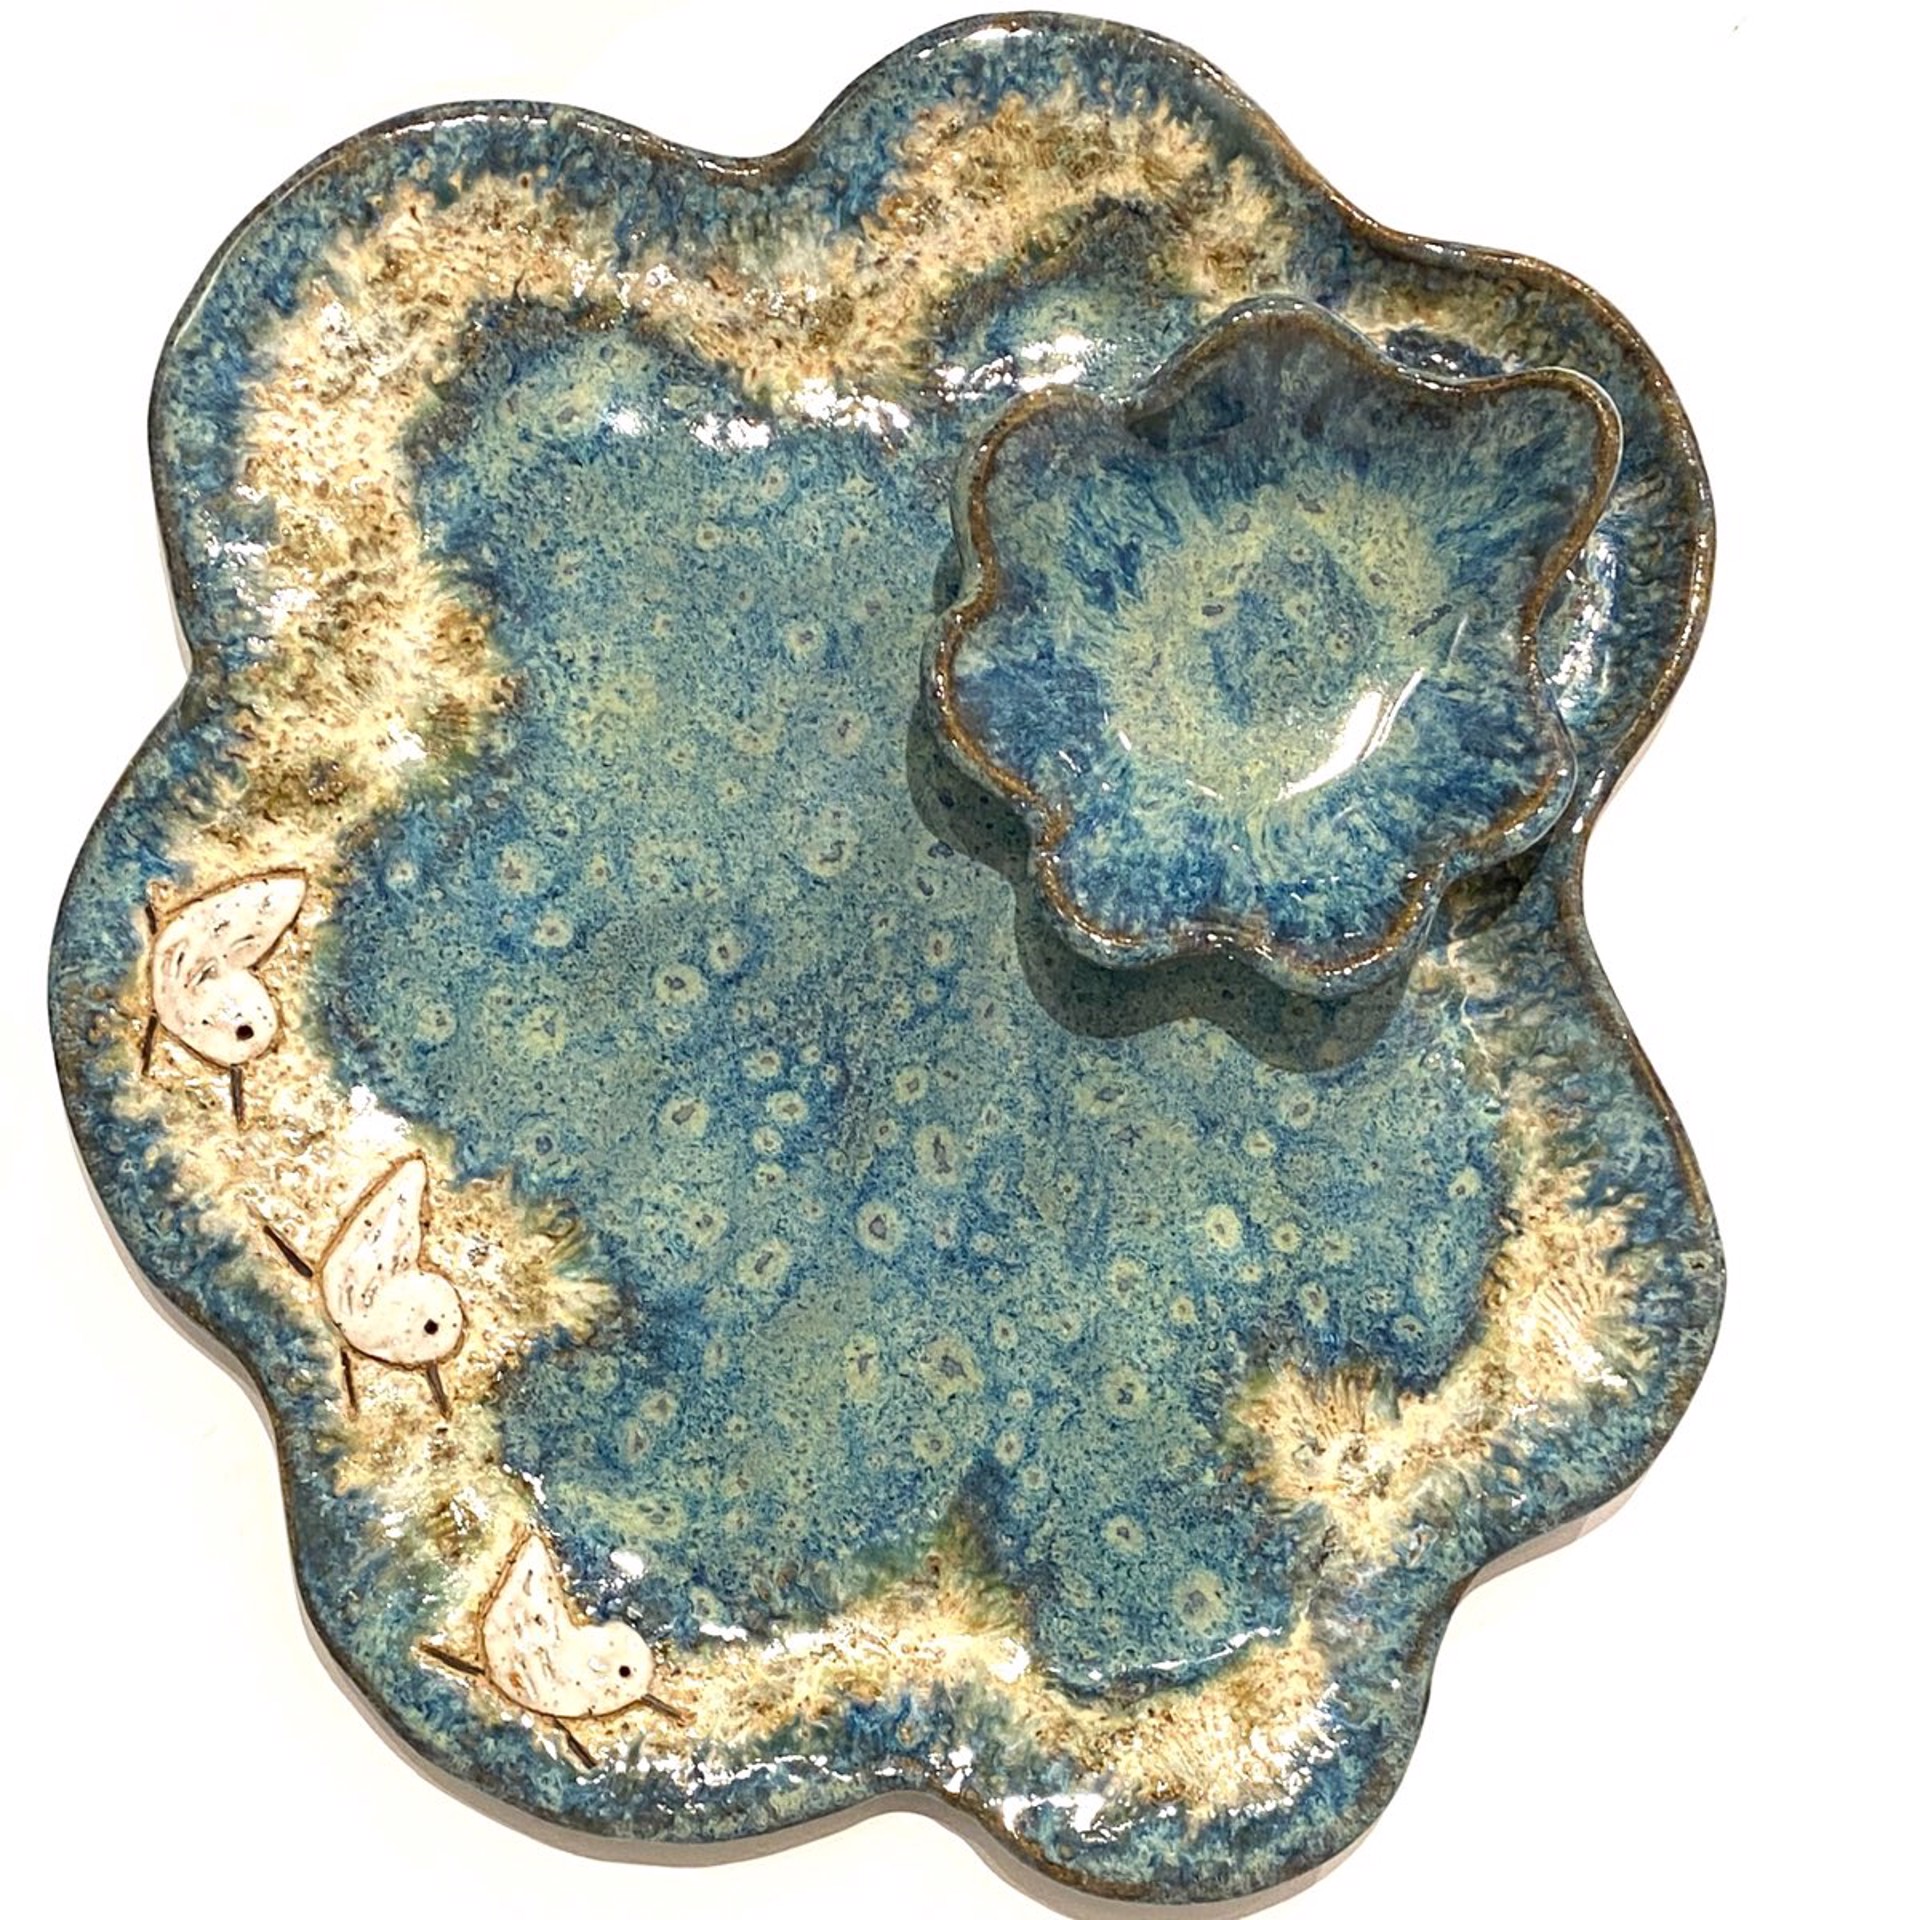 LG23-957 Large Chip N Dip with Three Sandpipers Blue Glaze) by Jim & Steffi Logan